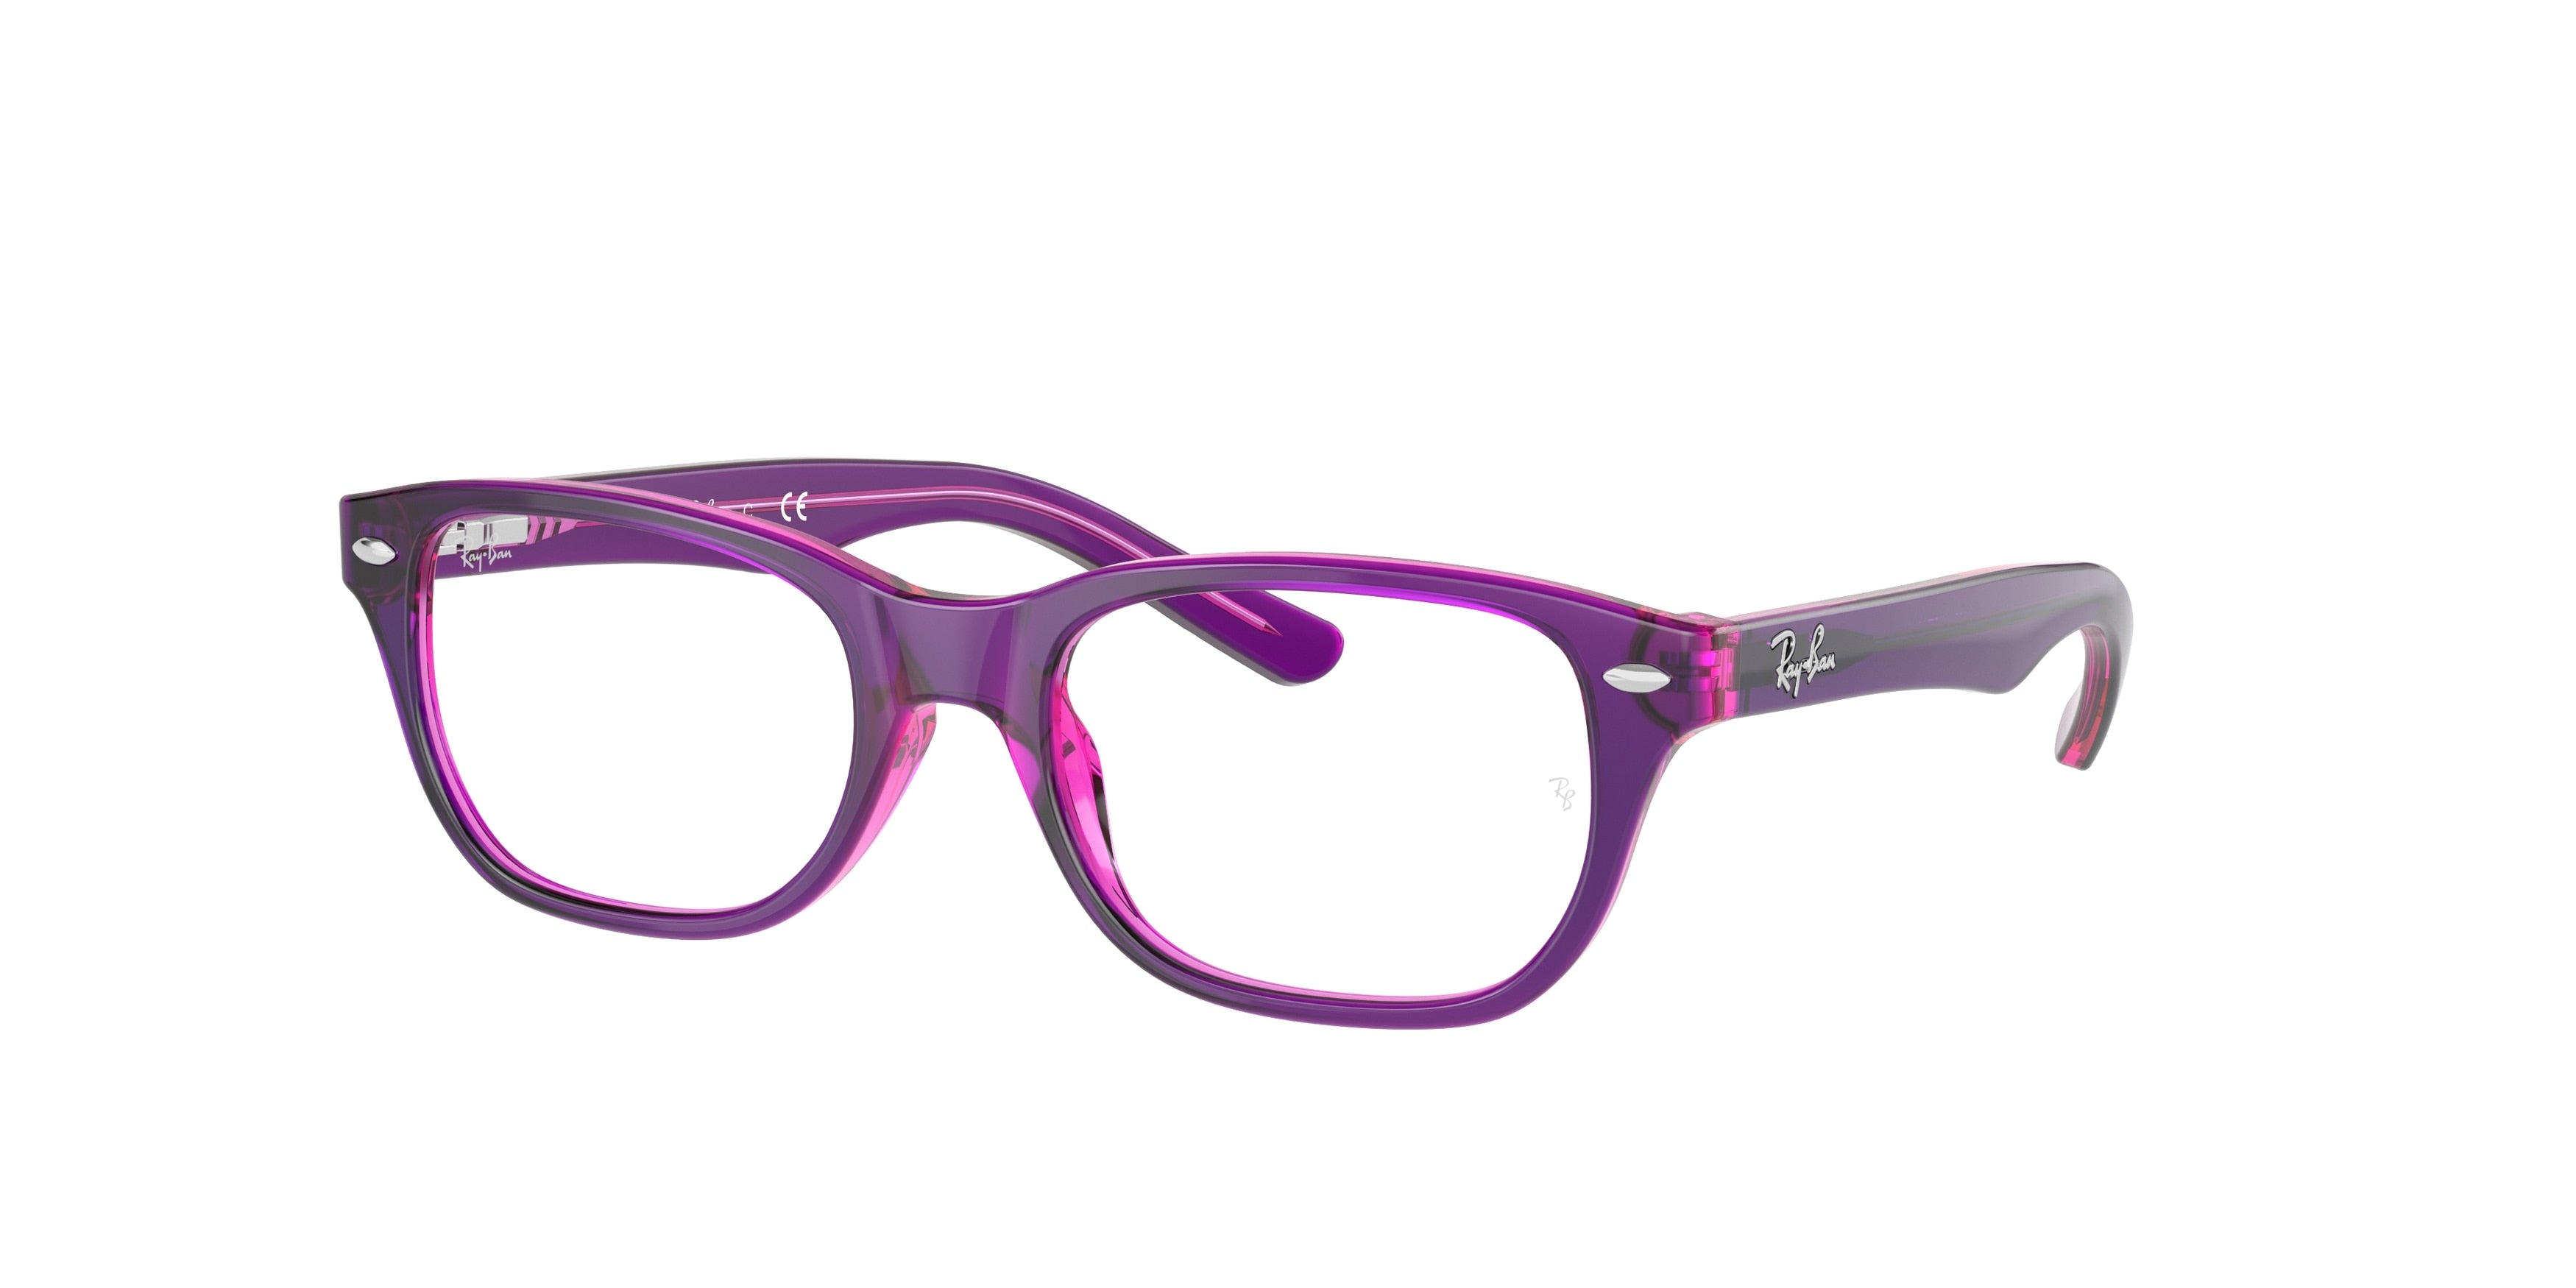 Ray-Ban Junior Vista RY1555 Square Eyeglasses  3666-Violet On Fuxia Fluo 48-130-16 - Color Map Violet